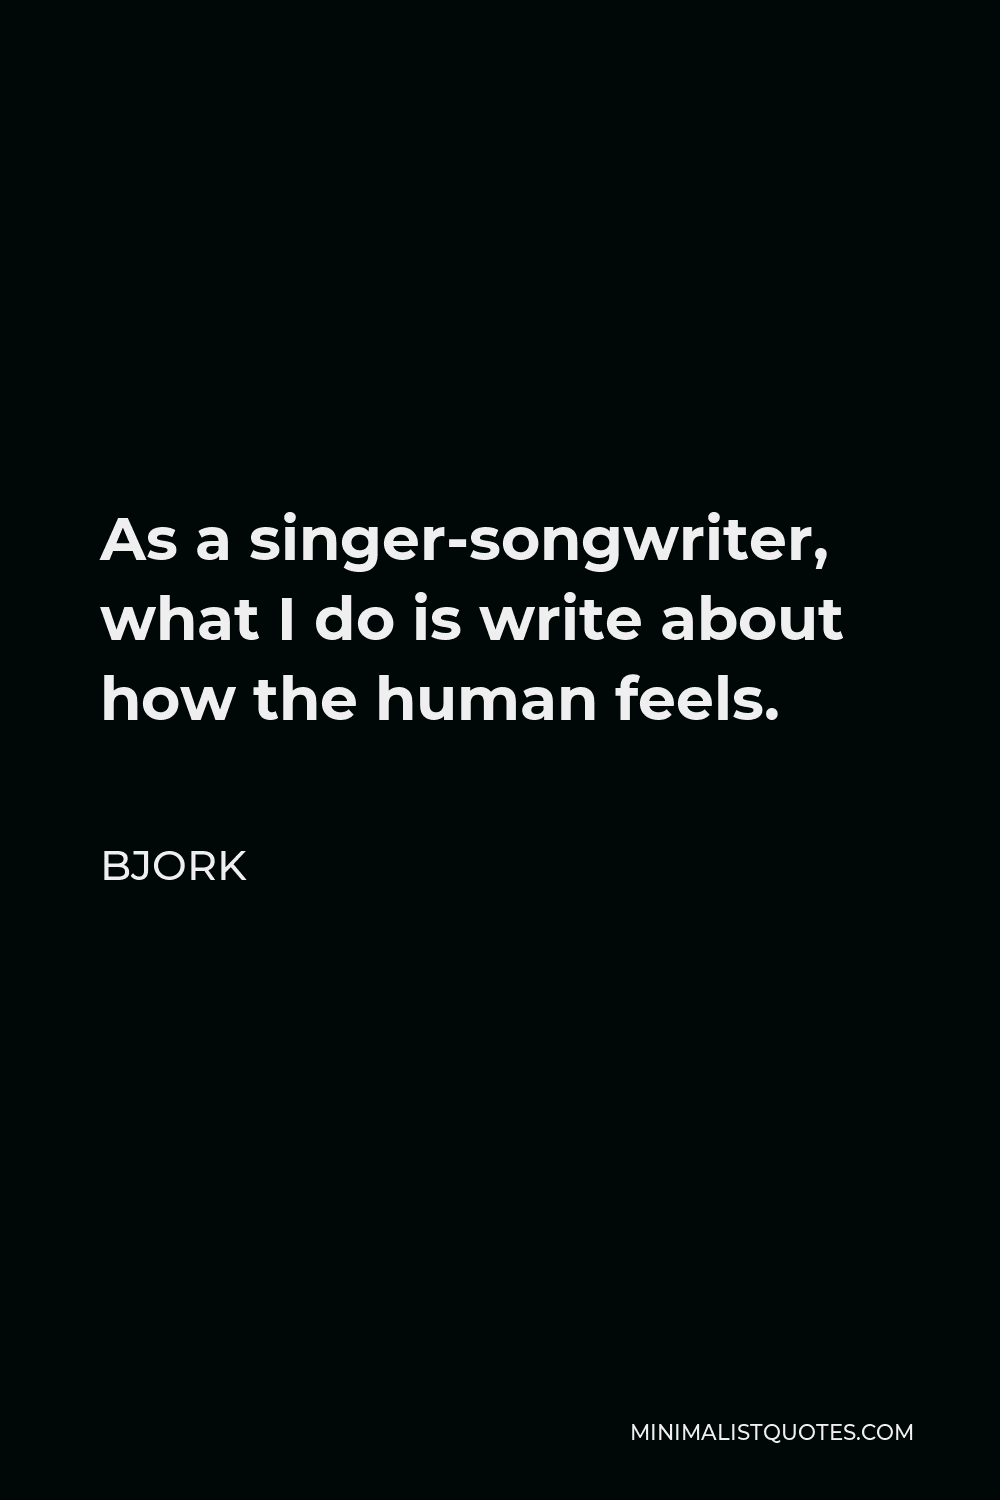 Bjork Quote - As a singer-songwriter, what I do is write about how the human feels.